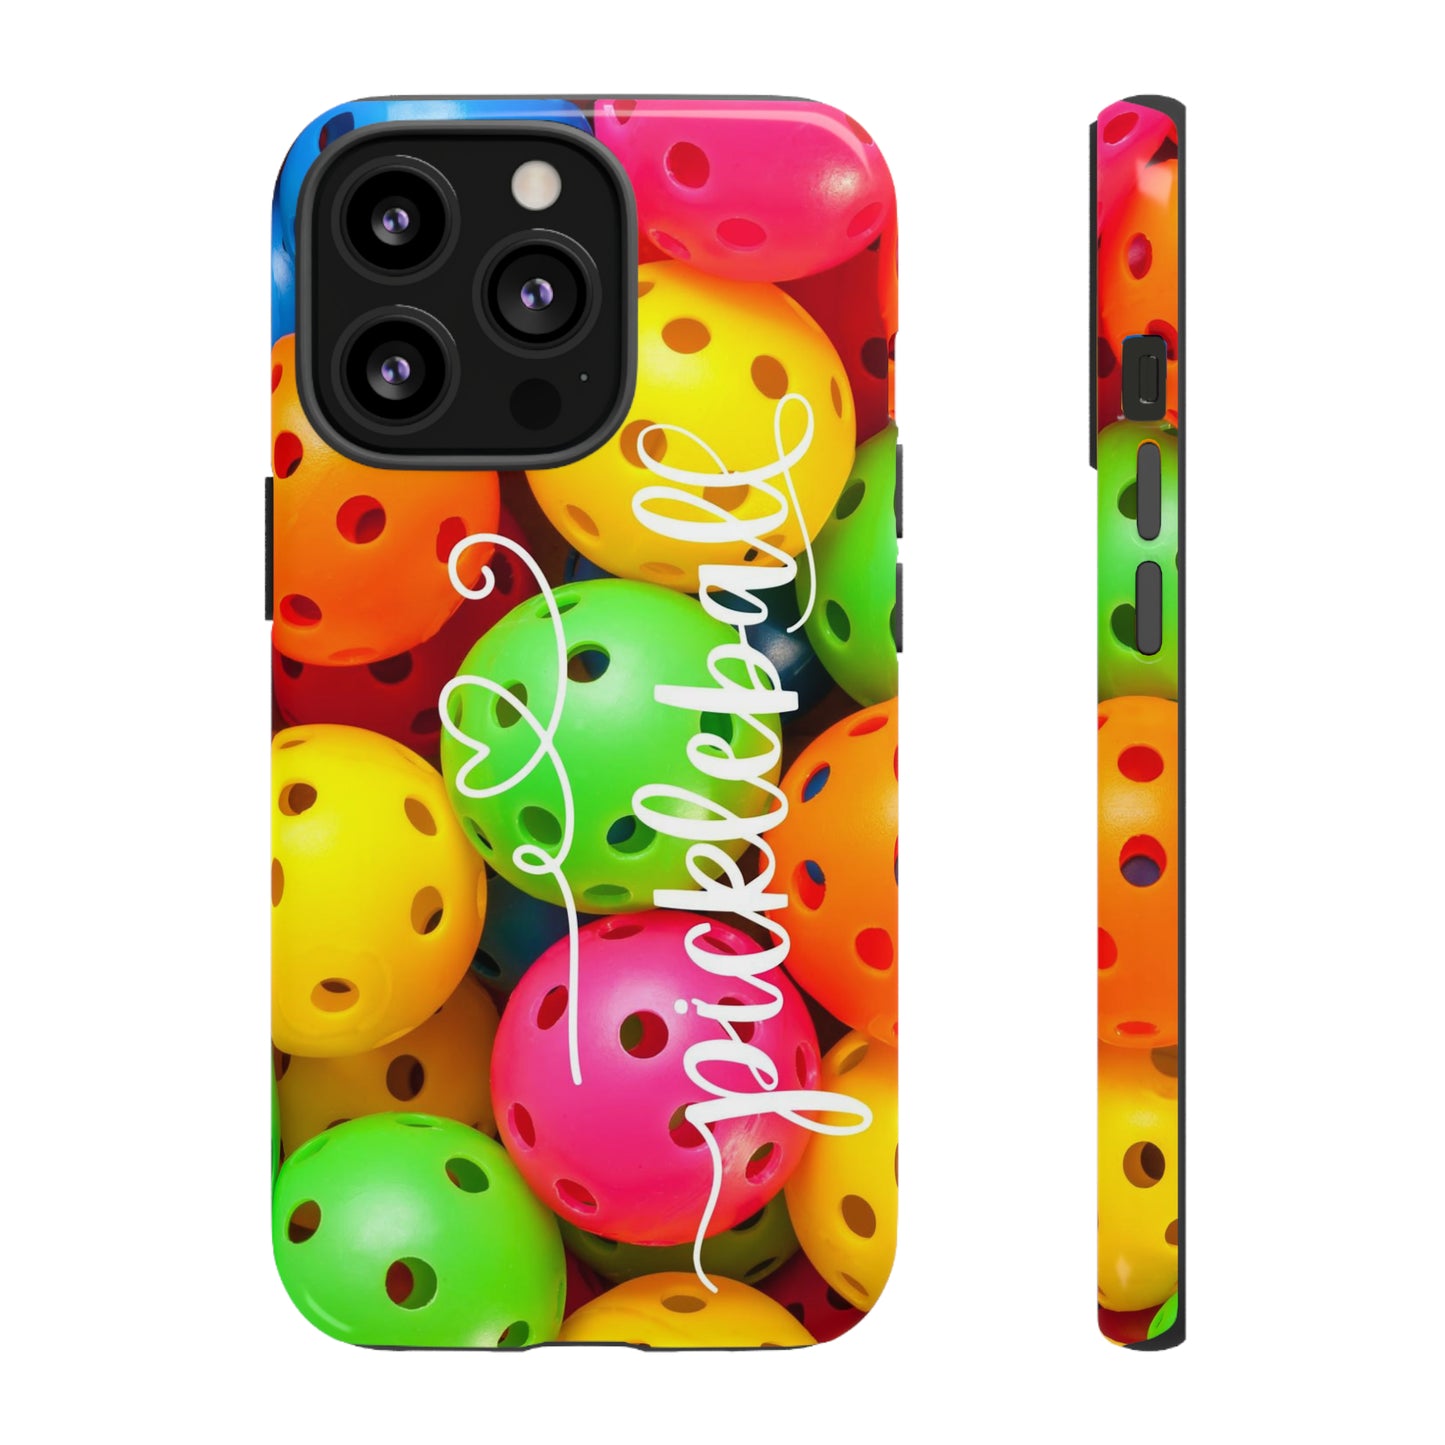 Love Pickleball Durable IPhone Case, IPhone Case, Phone Cover, Pickleball Lover, Gifts For Her, Sports IPhone Case, Colorful IPhone Case